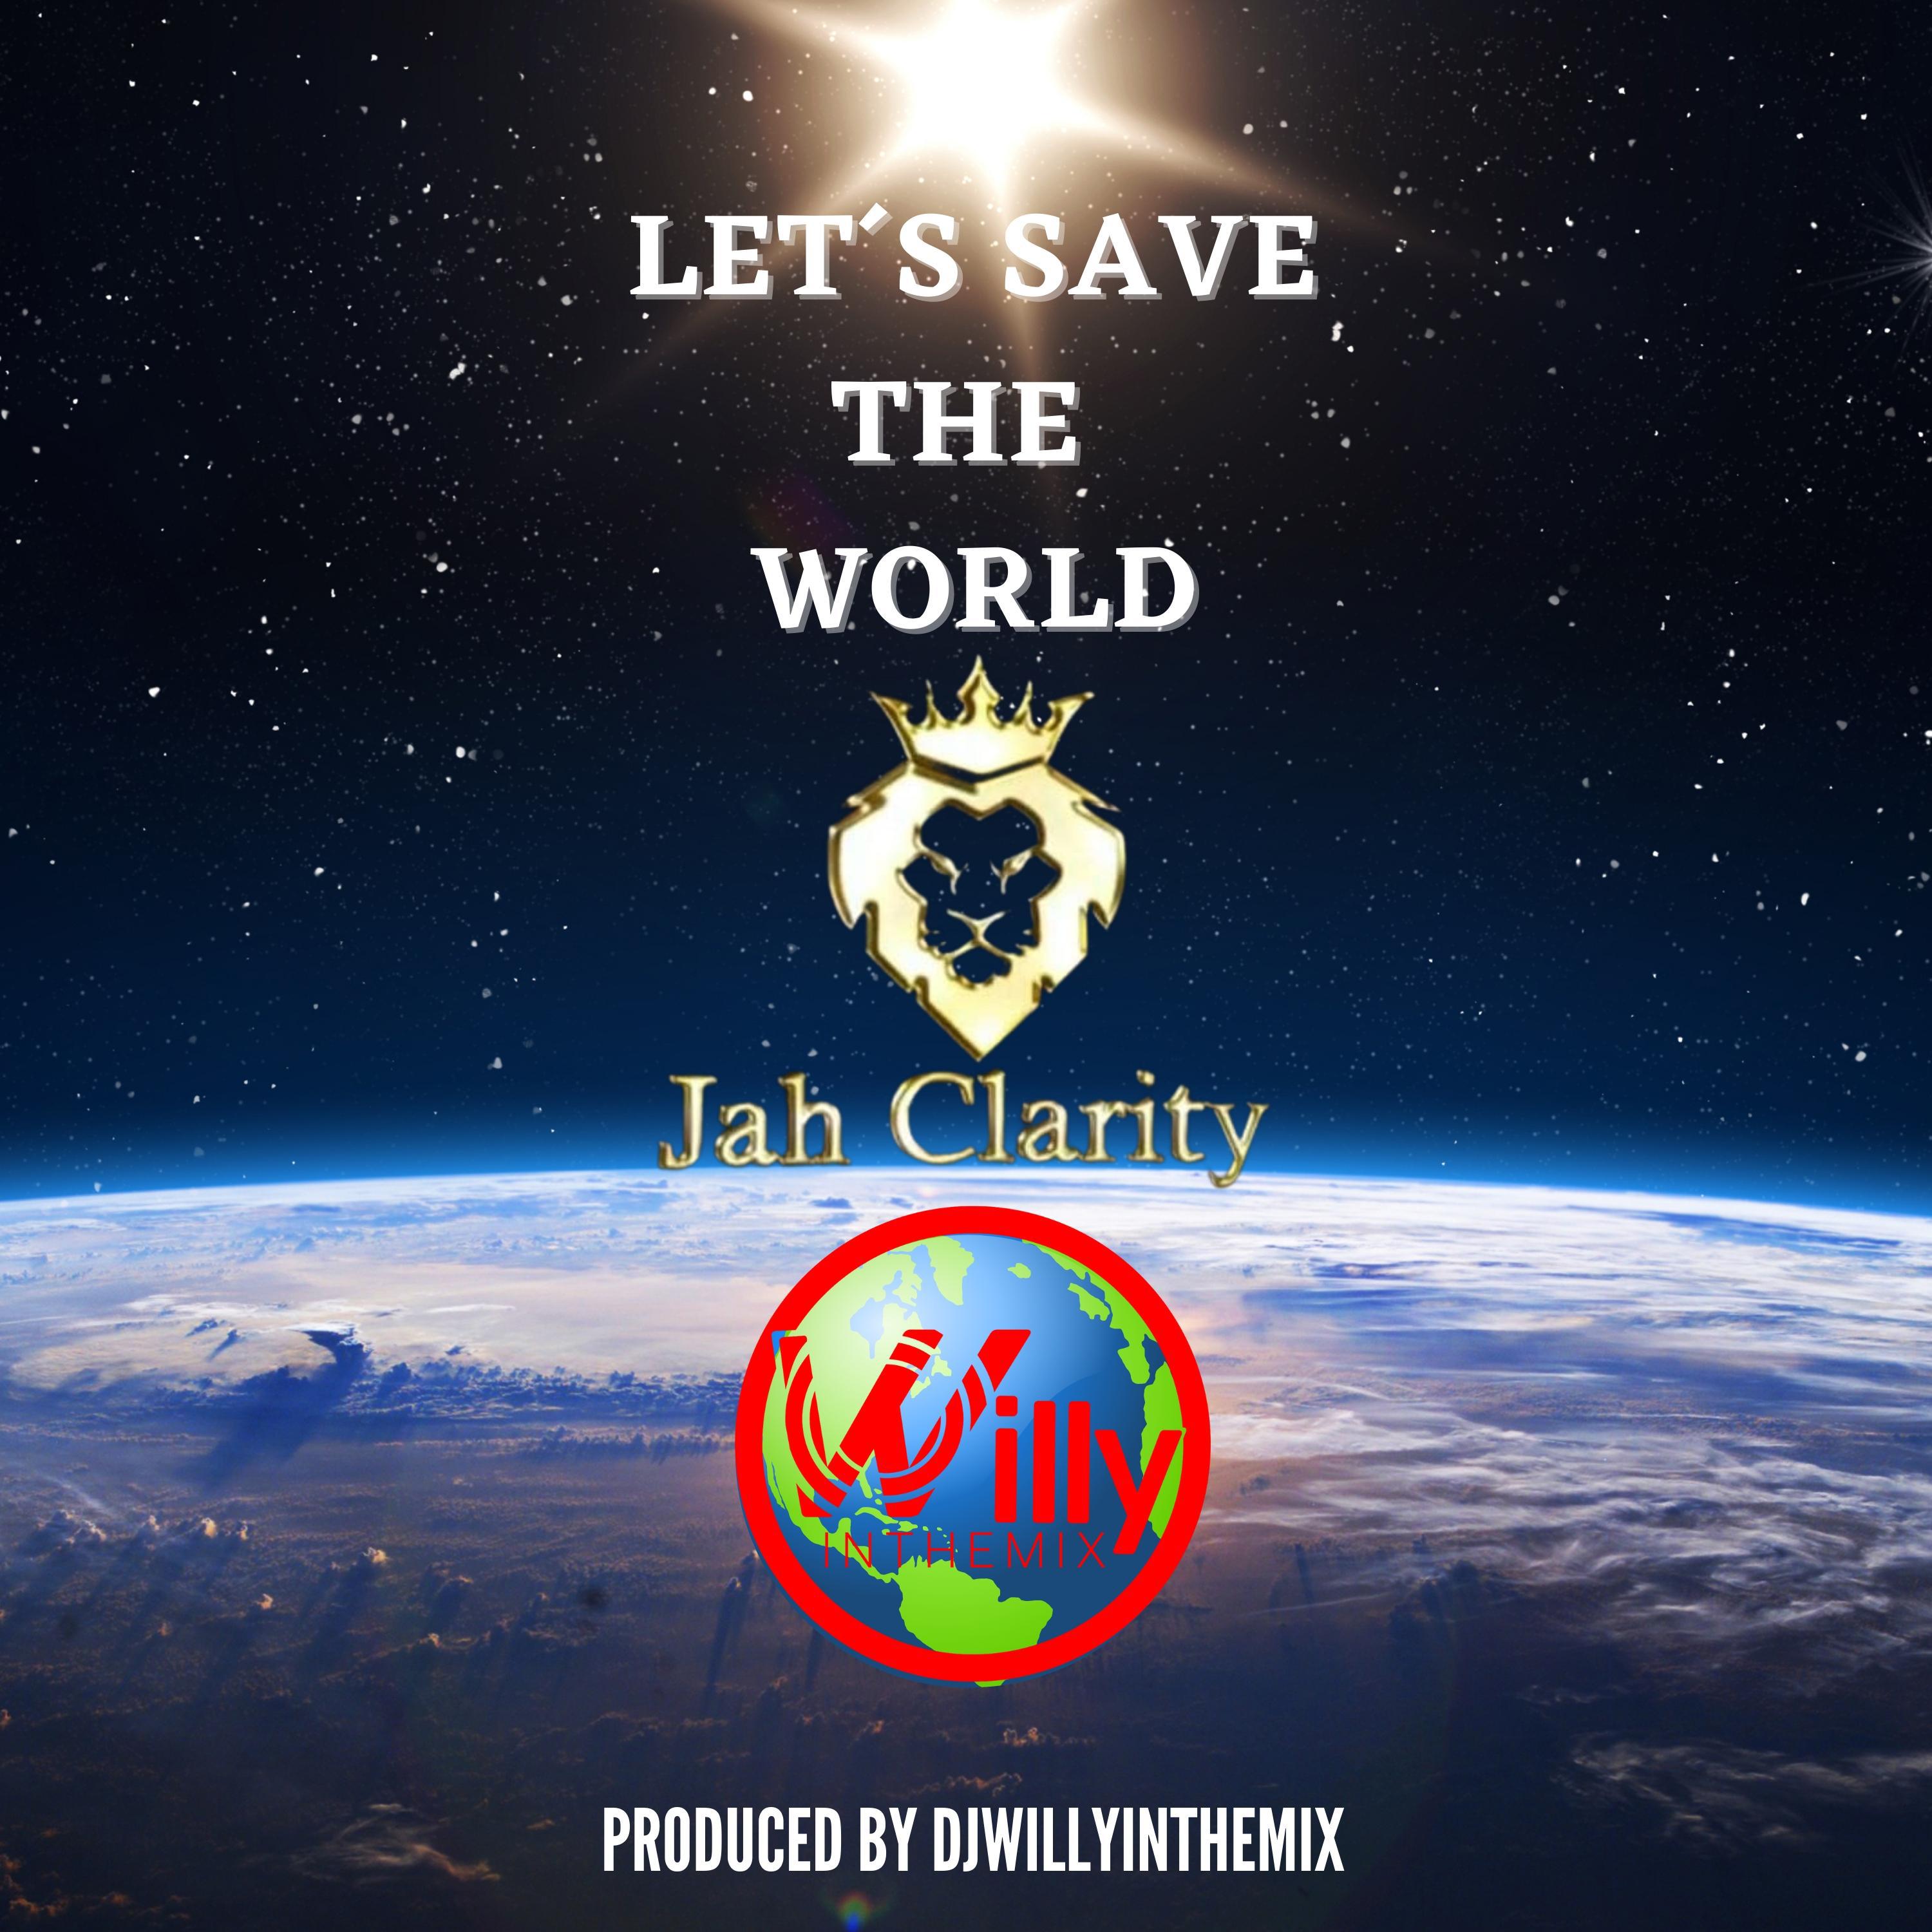 DjWillyintheMix - Let's Save The World (feat. Jah Clarity)